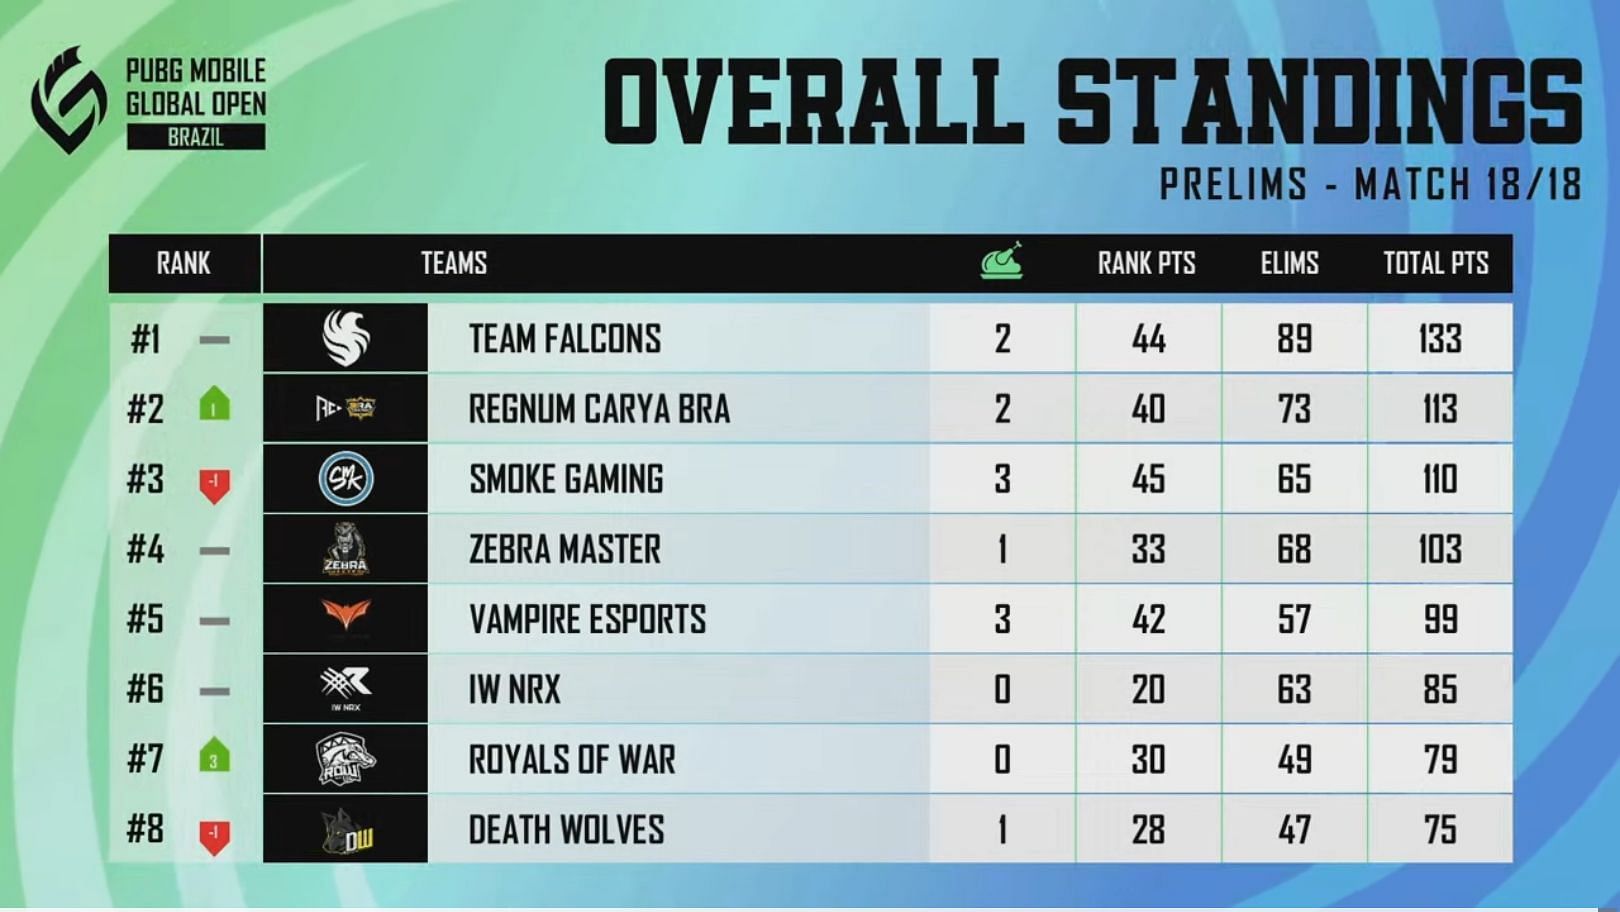 RTeam Falcons claimed the first rank in Prelims (Image via PUBG Mobile)